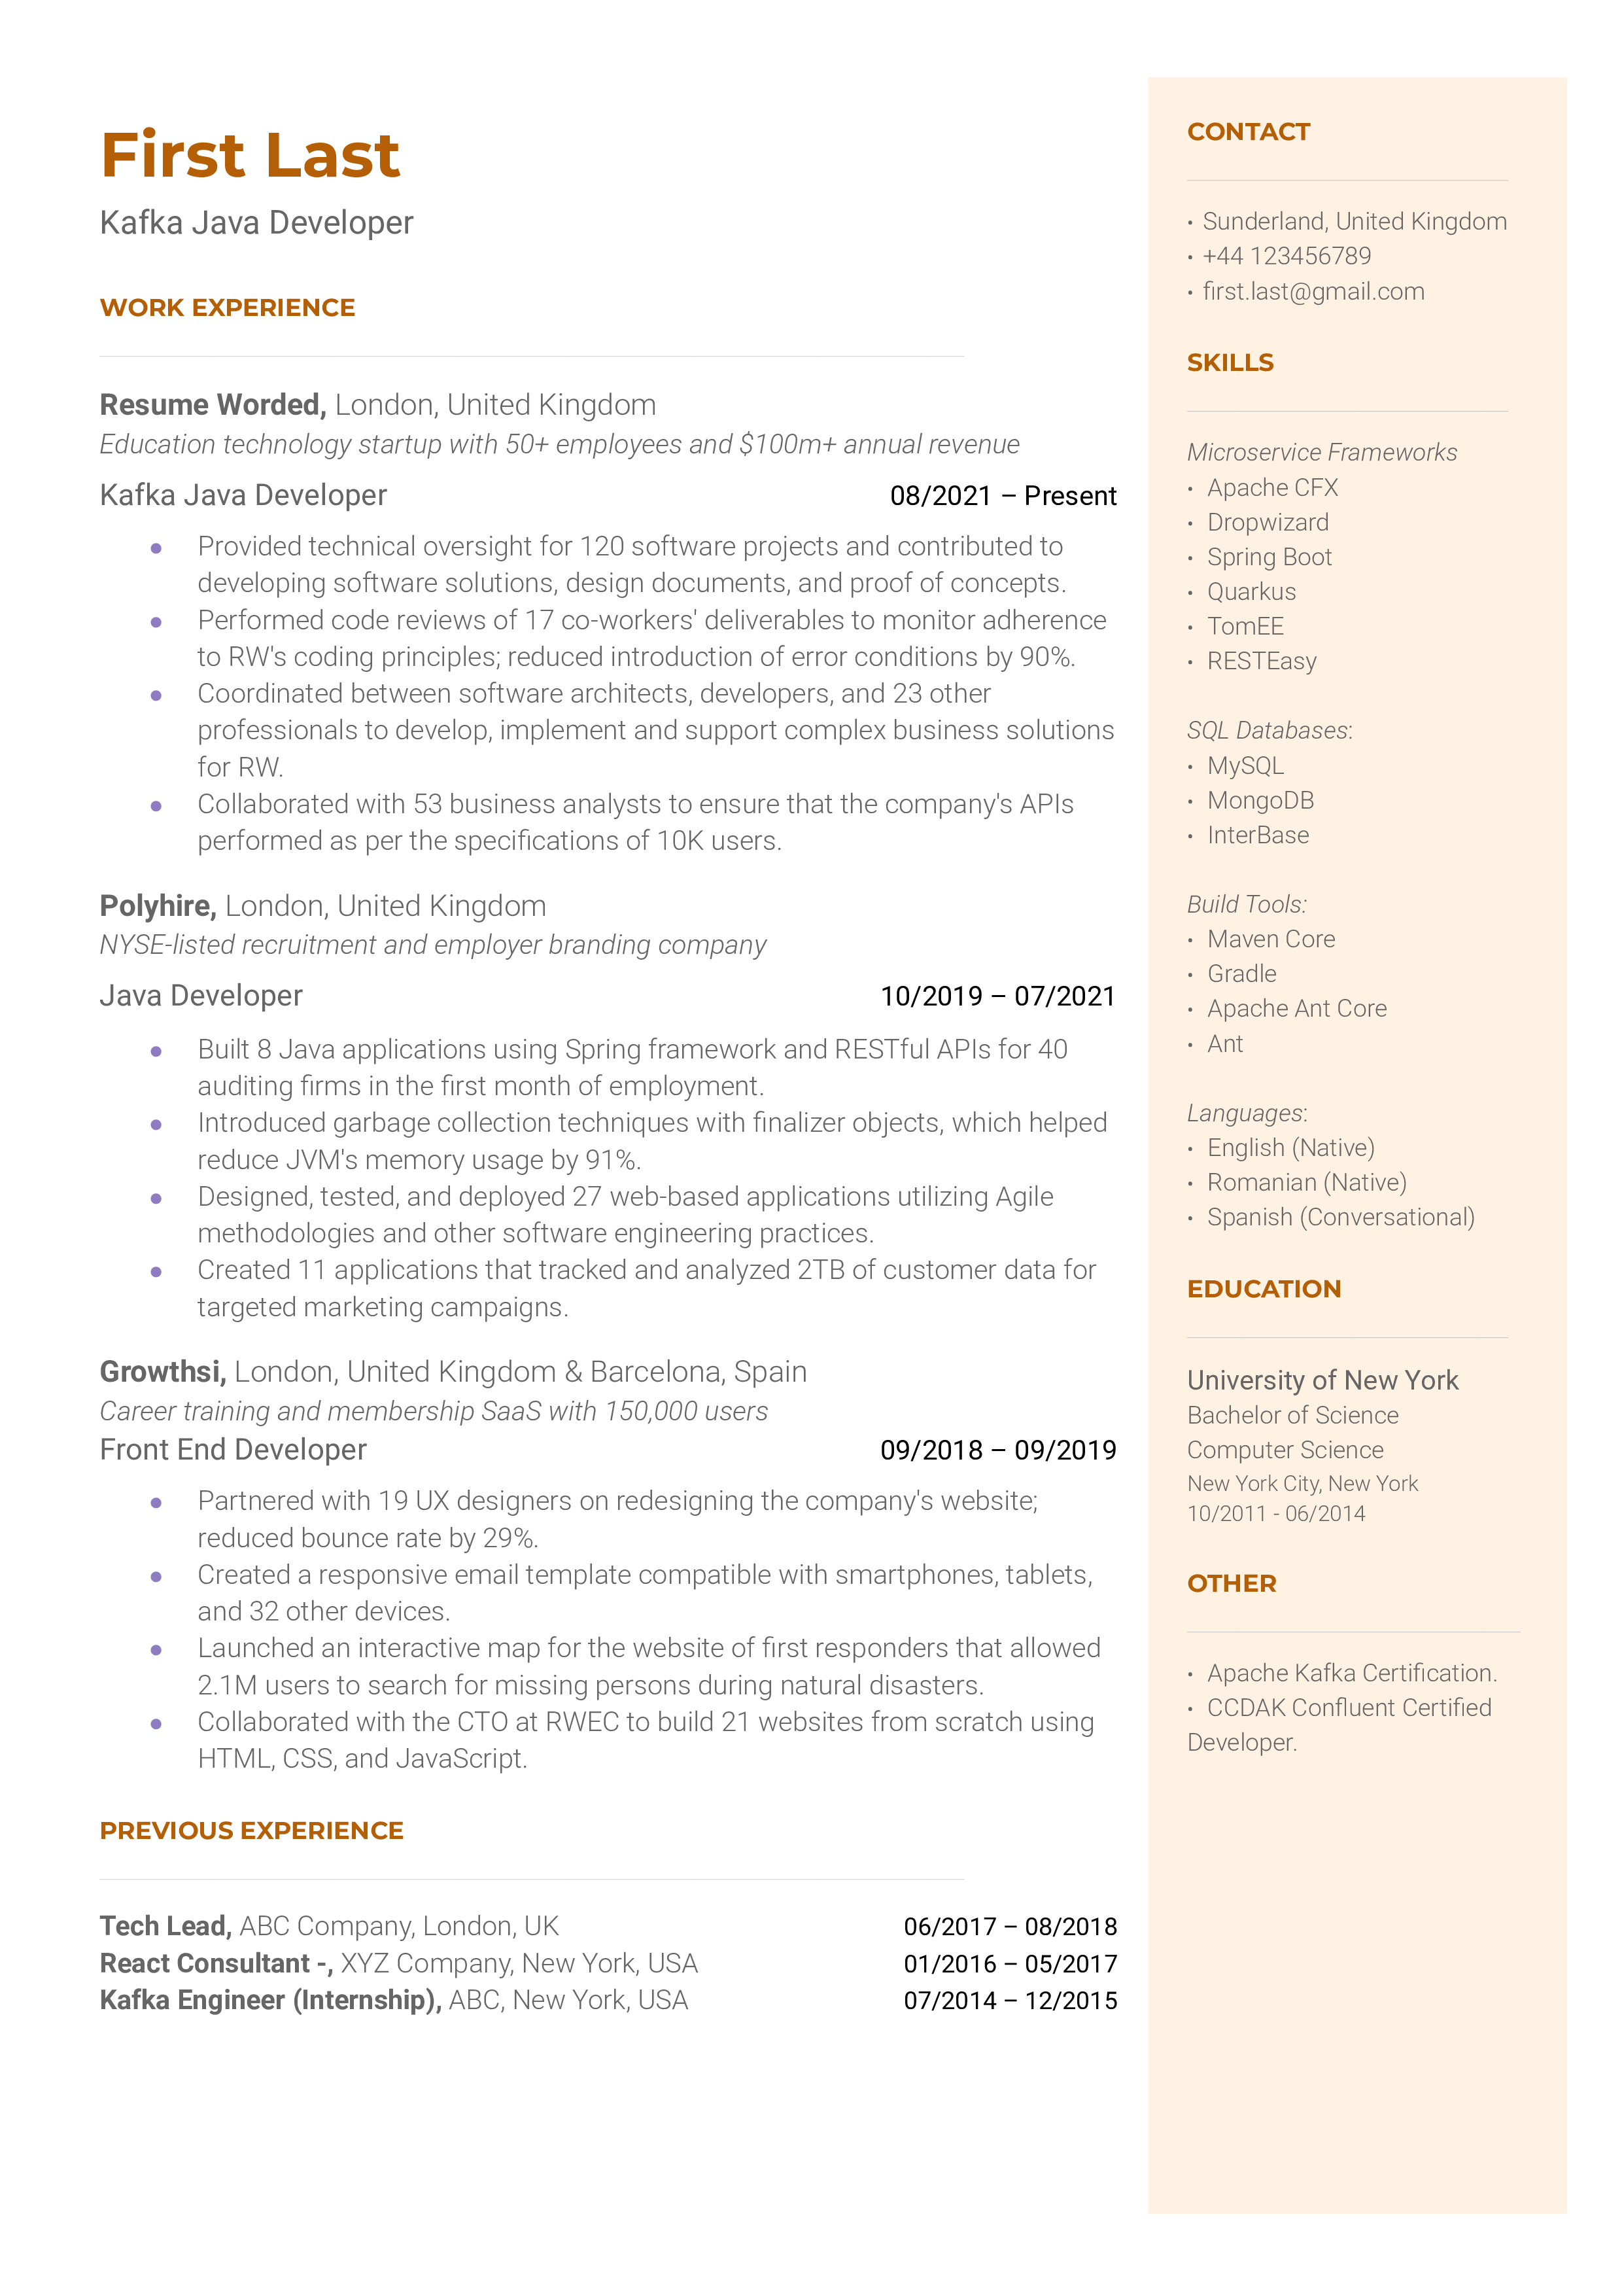 A well-structured CV displaying the Kafka and Java experience of a Kafka Java Developer applicant.